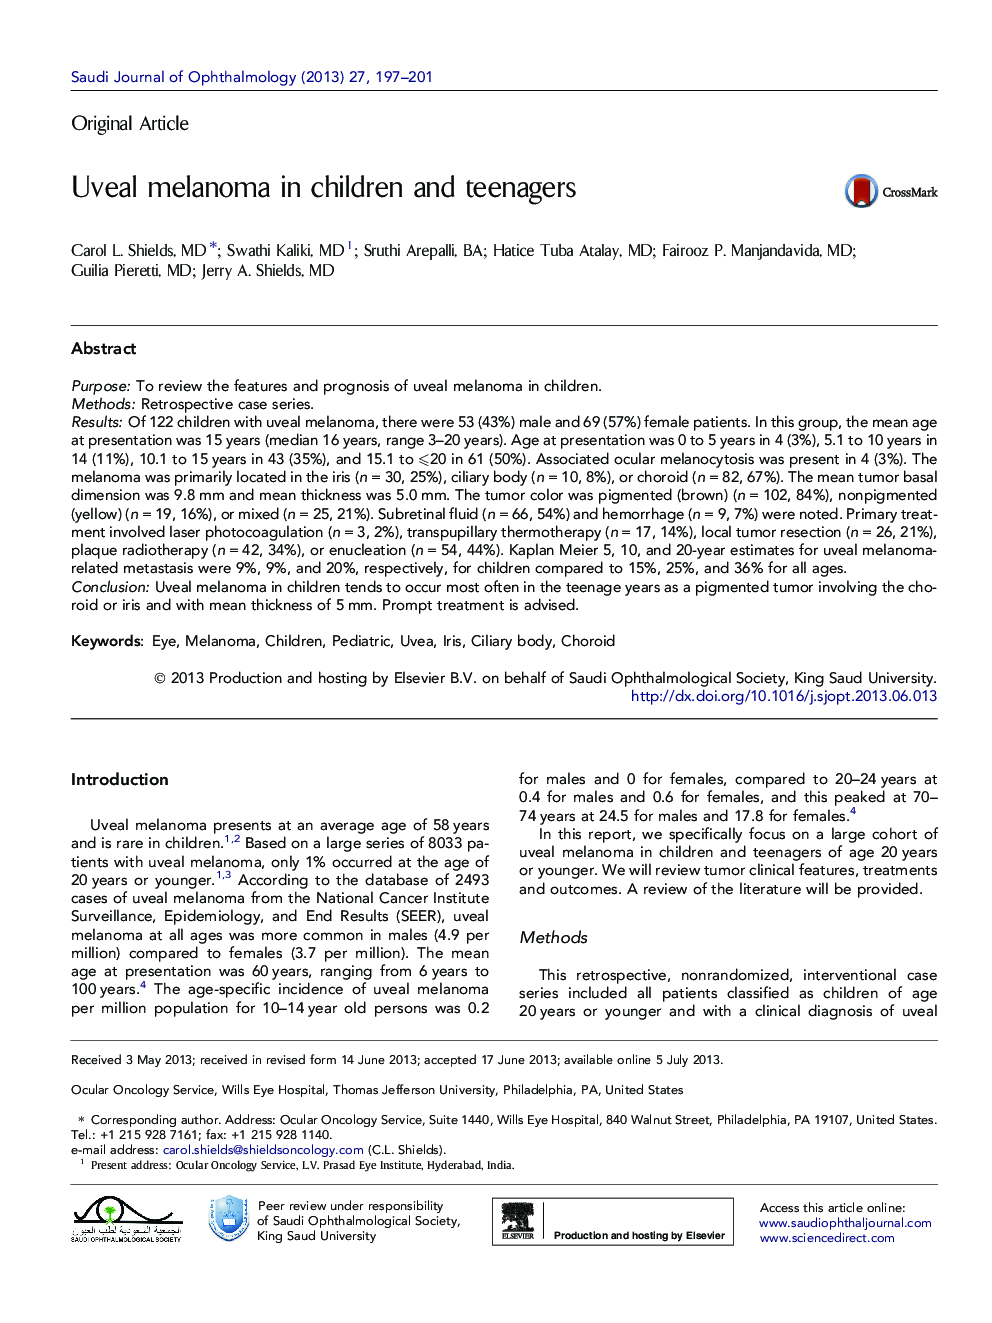 Uveal melanoma in children and teenagers 